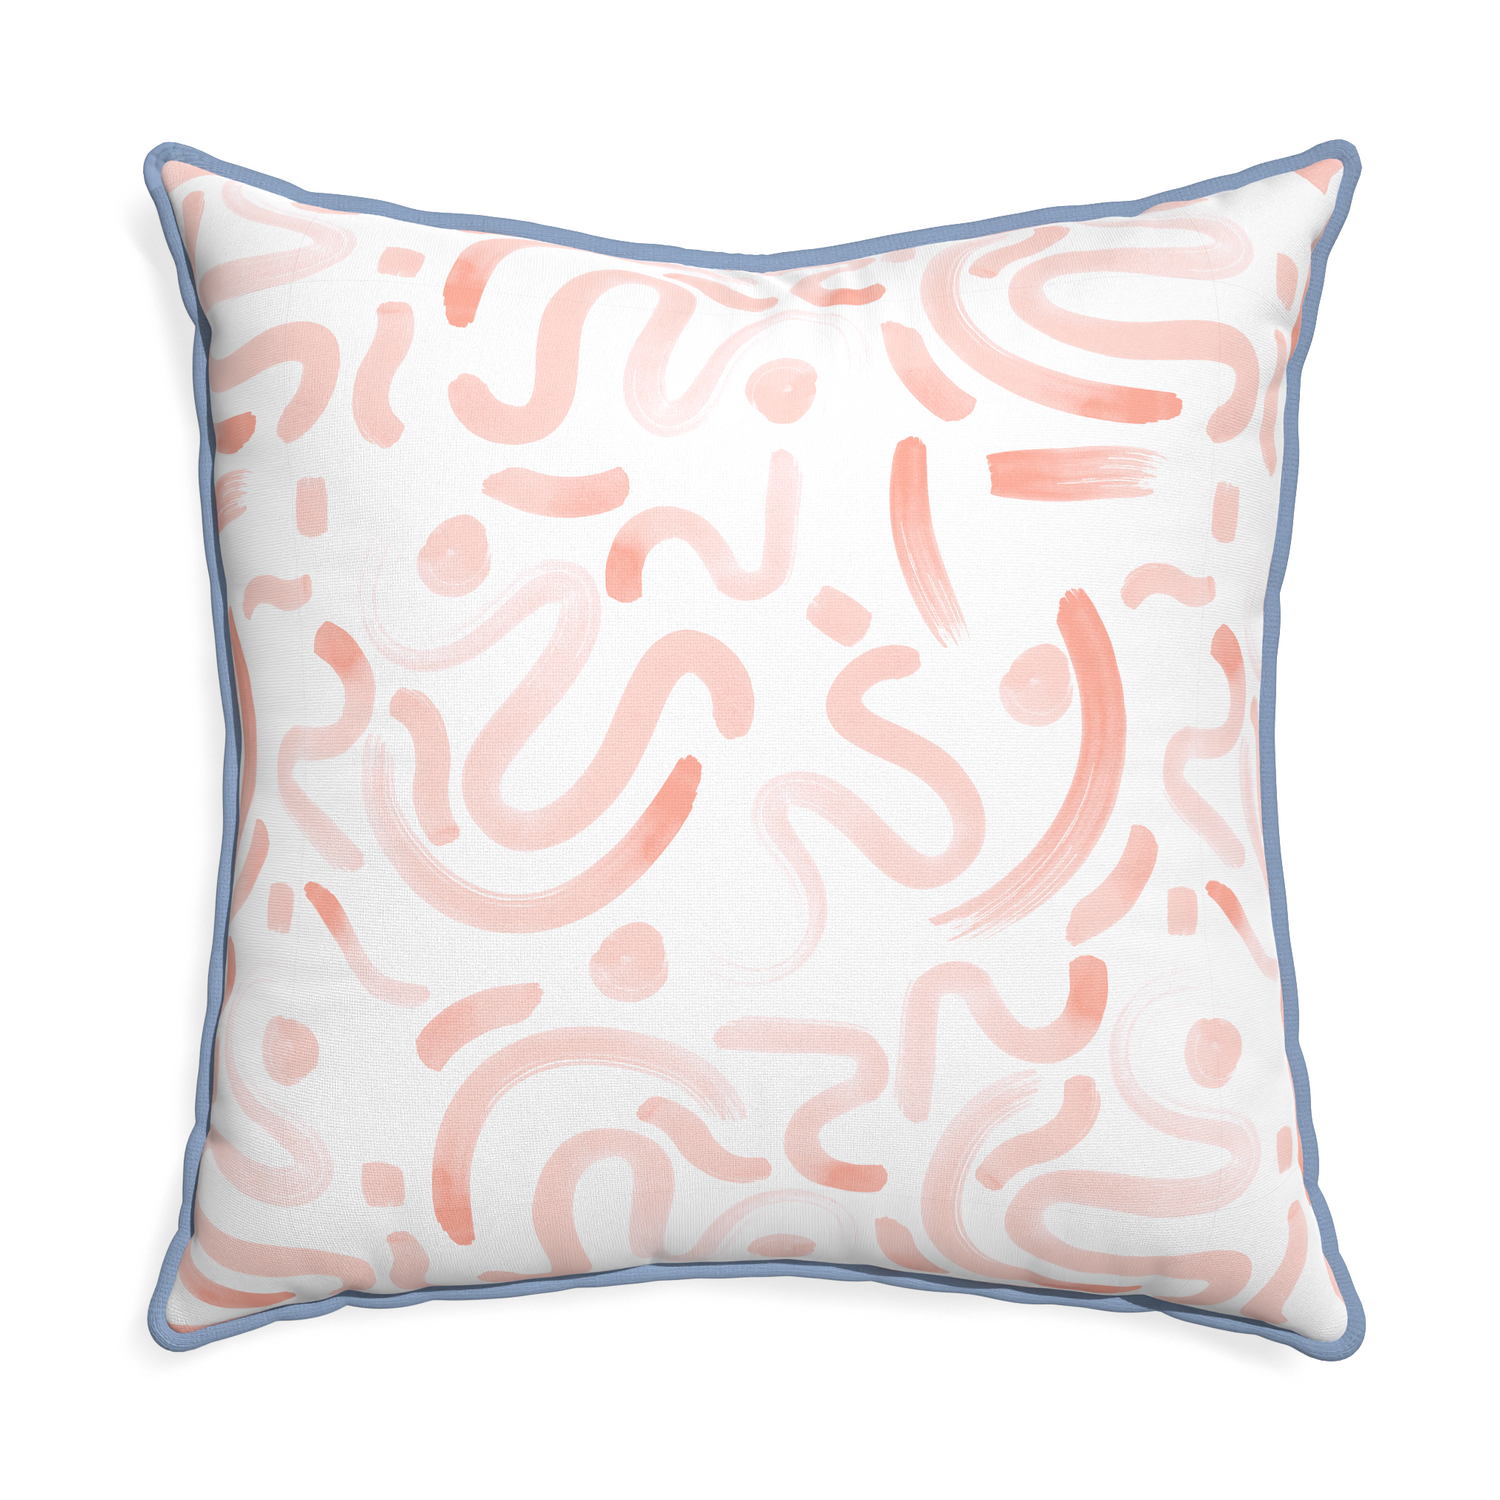 Euro-sham hockney pink custom pink graphicpillow with sky piping on white background